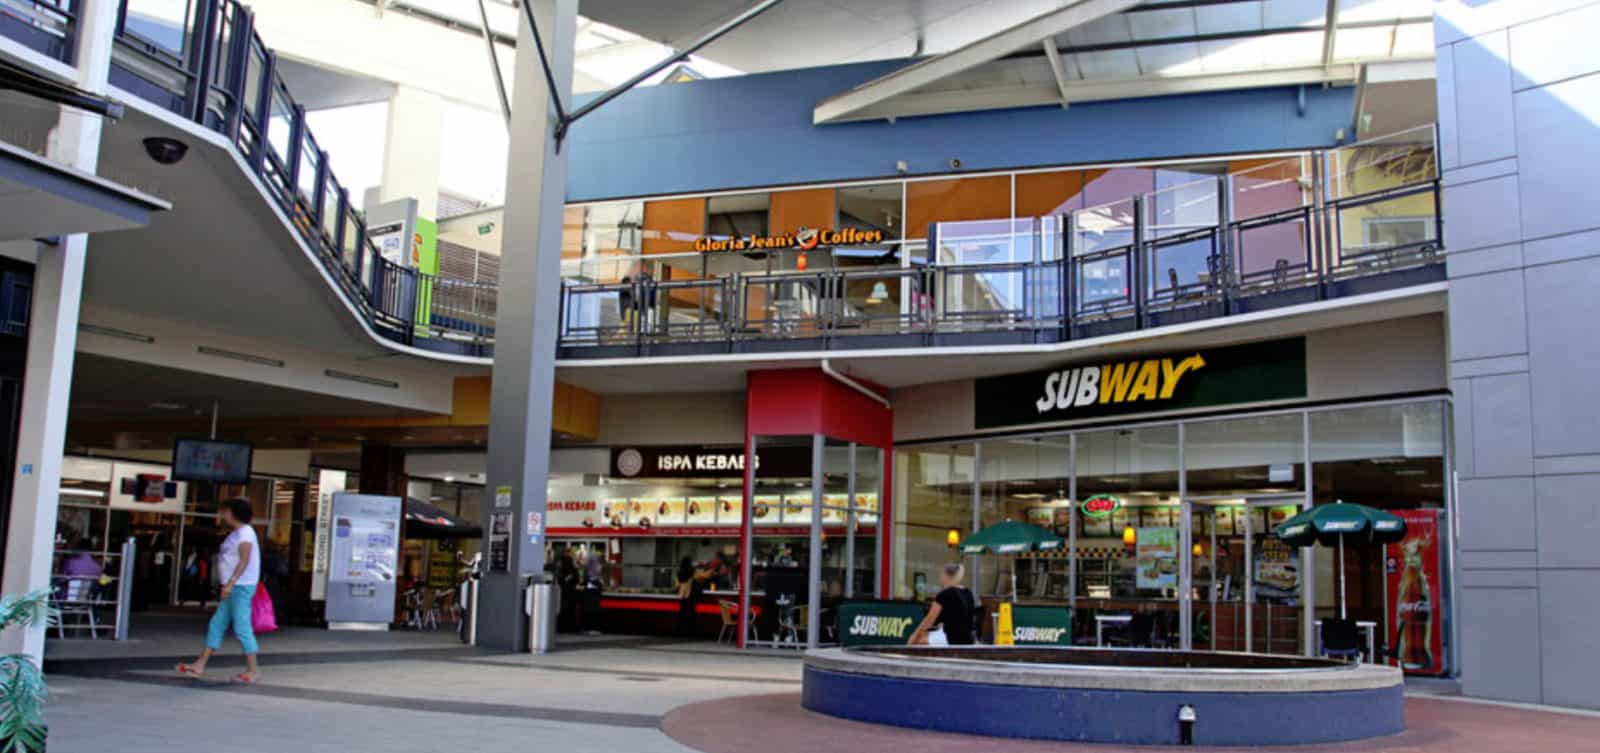 Watertown Brand Outlet, Perth, Western Australia